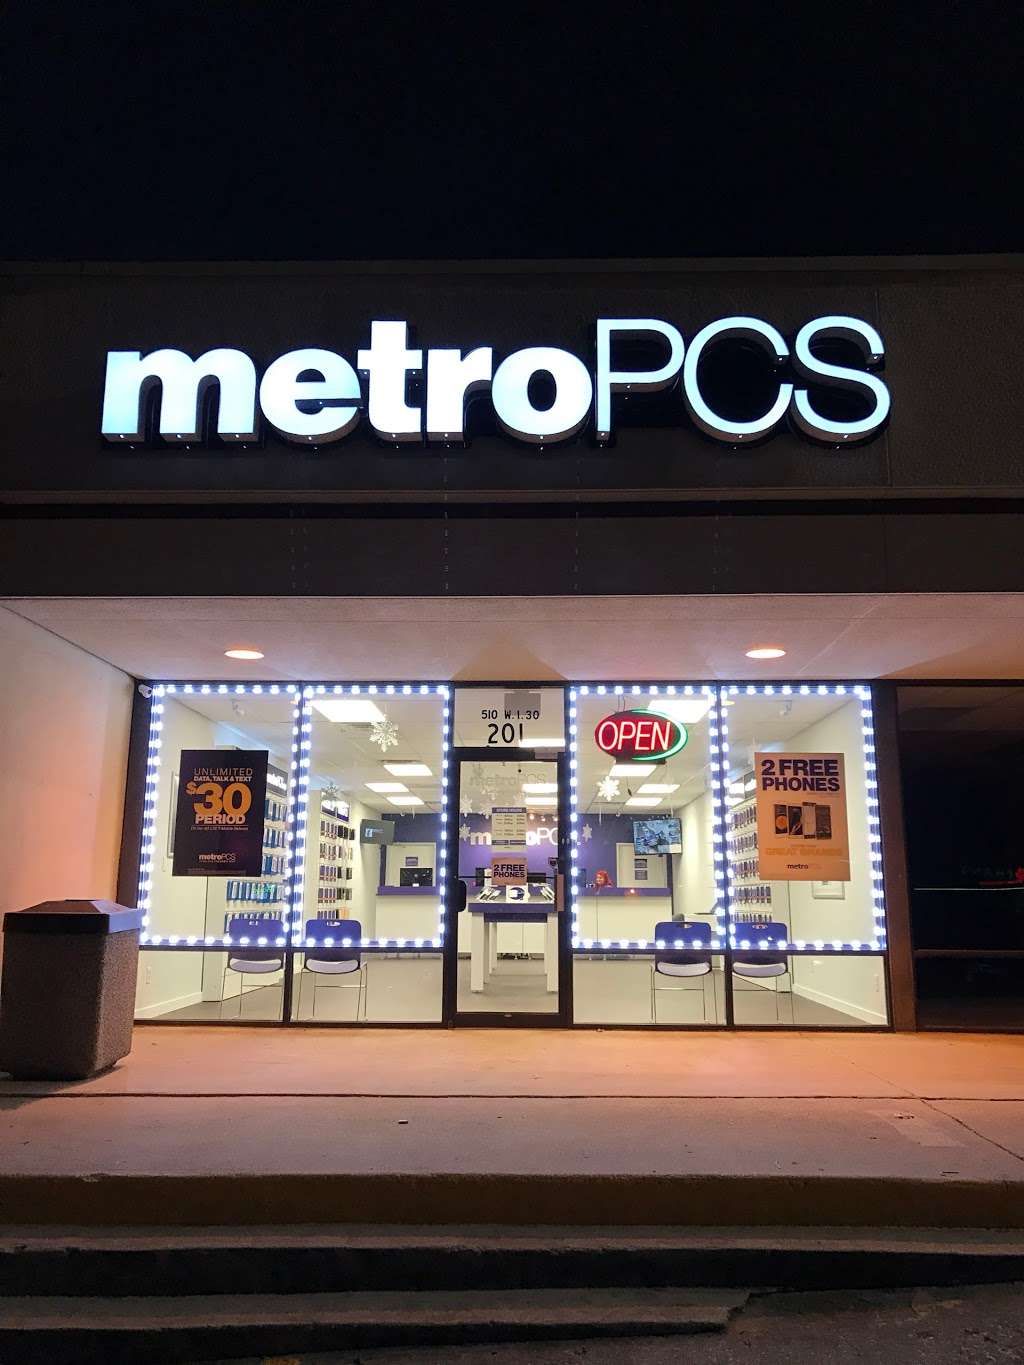 Metro by T-Mobile | 510 W Interstate 30 Ste 201, Garland, TX 75043 | Phone: (972) 863-9931